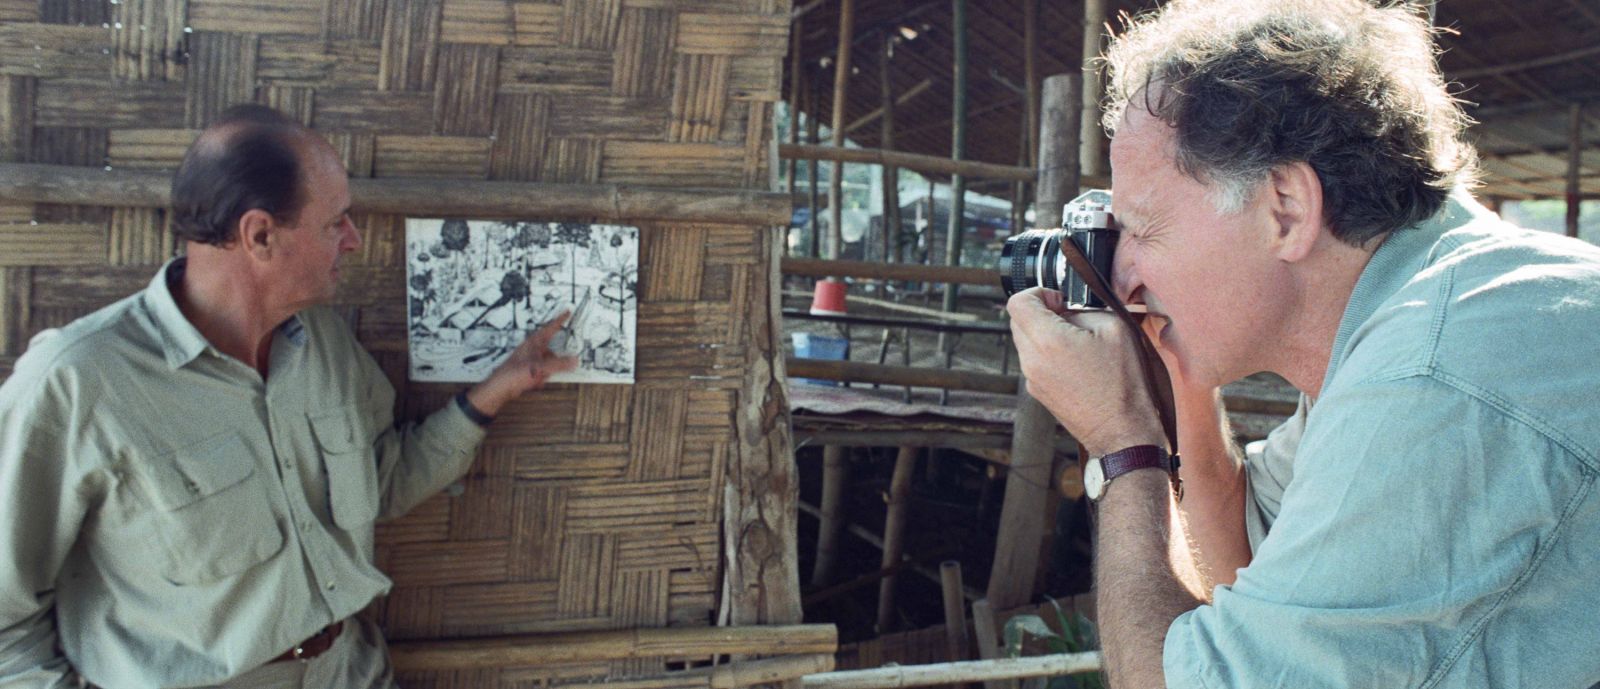 Werner Herzog is taking a photo of Dieter Denger who is pointing at a photograph pinned to a wooden wall.